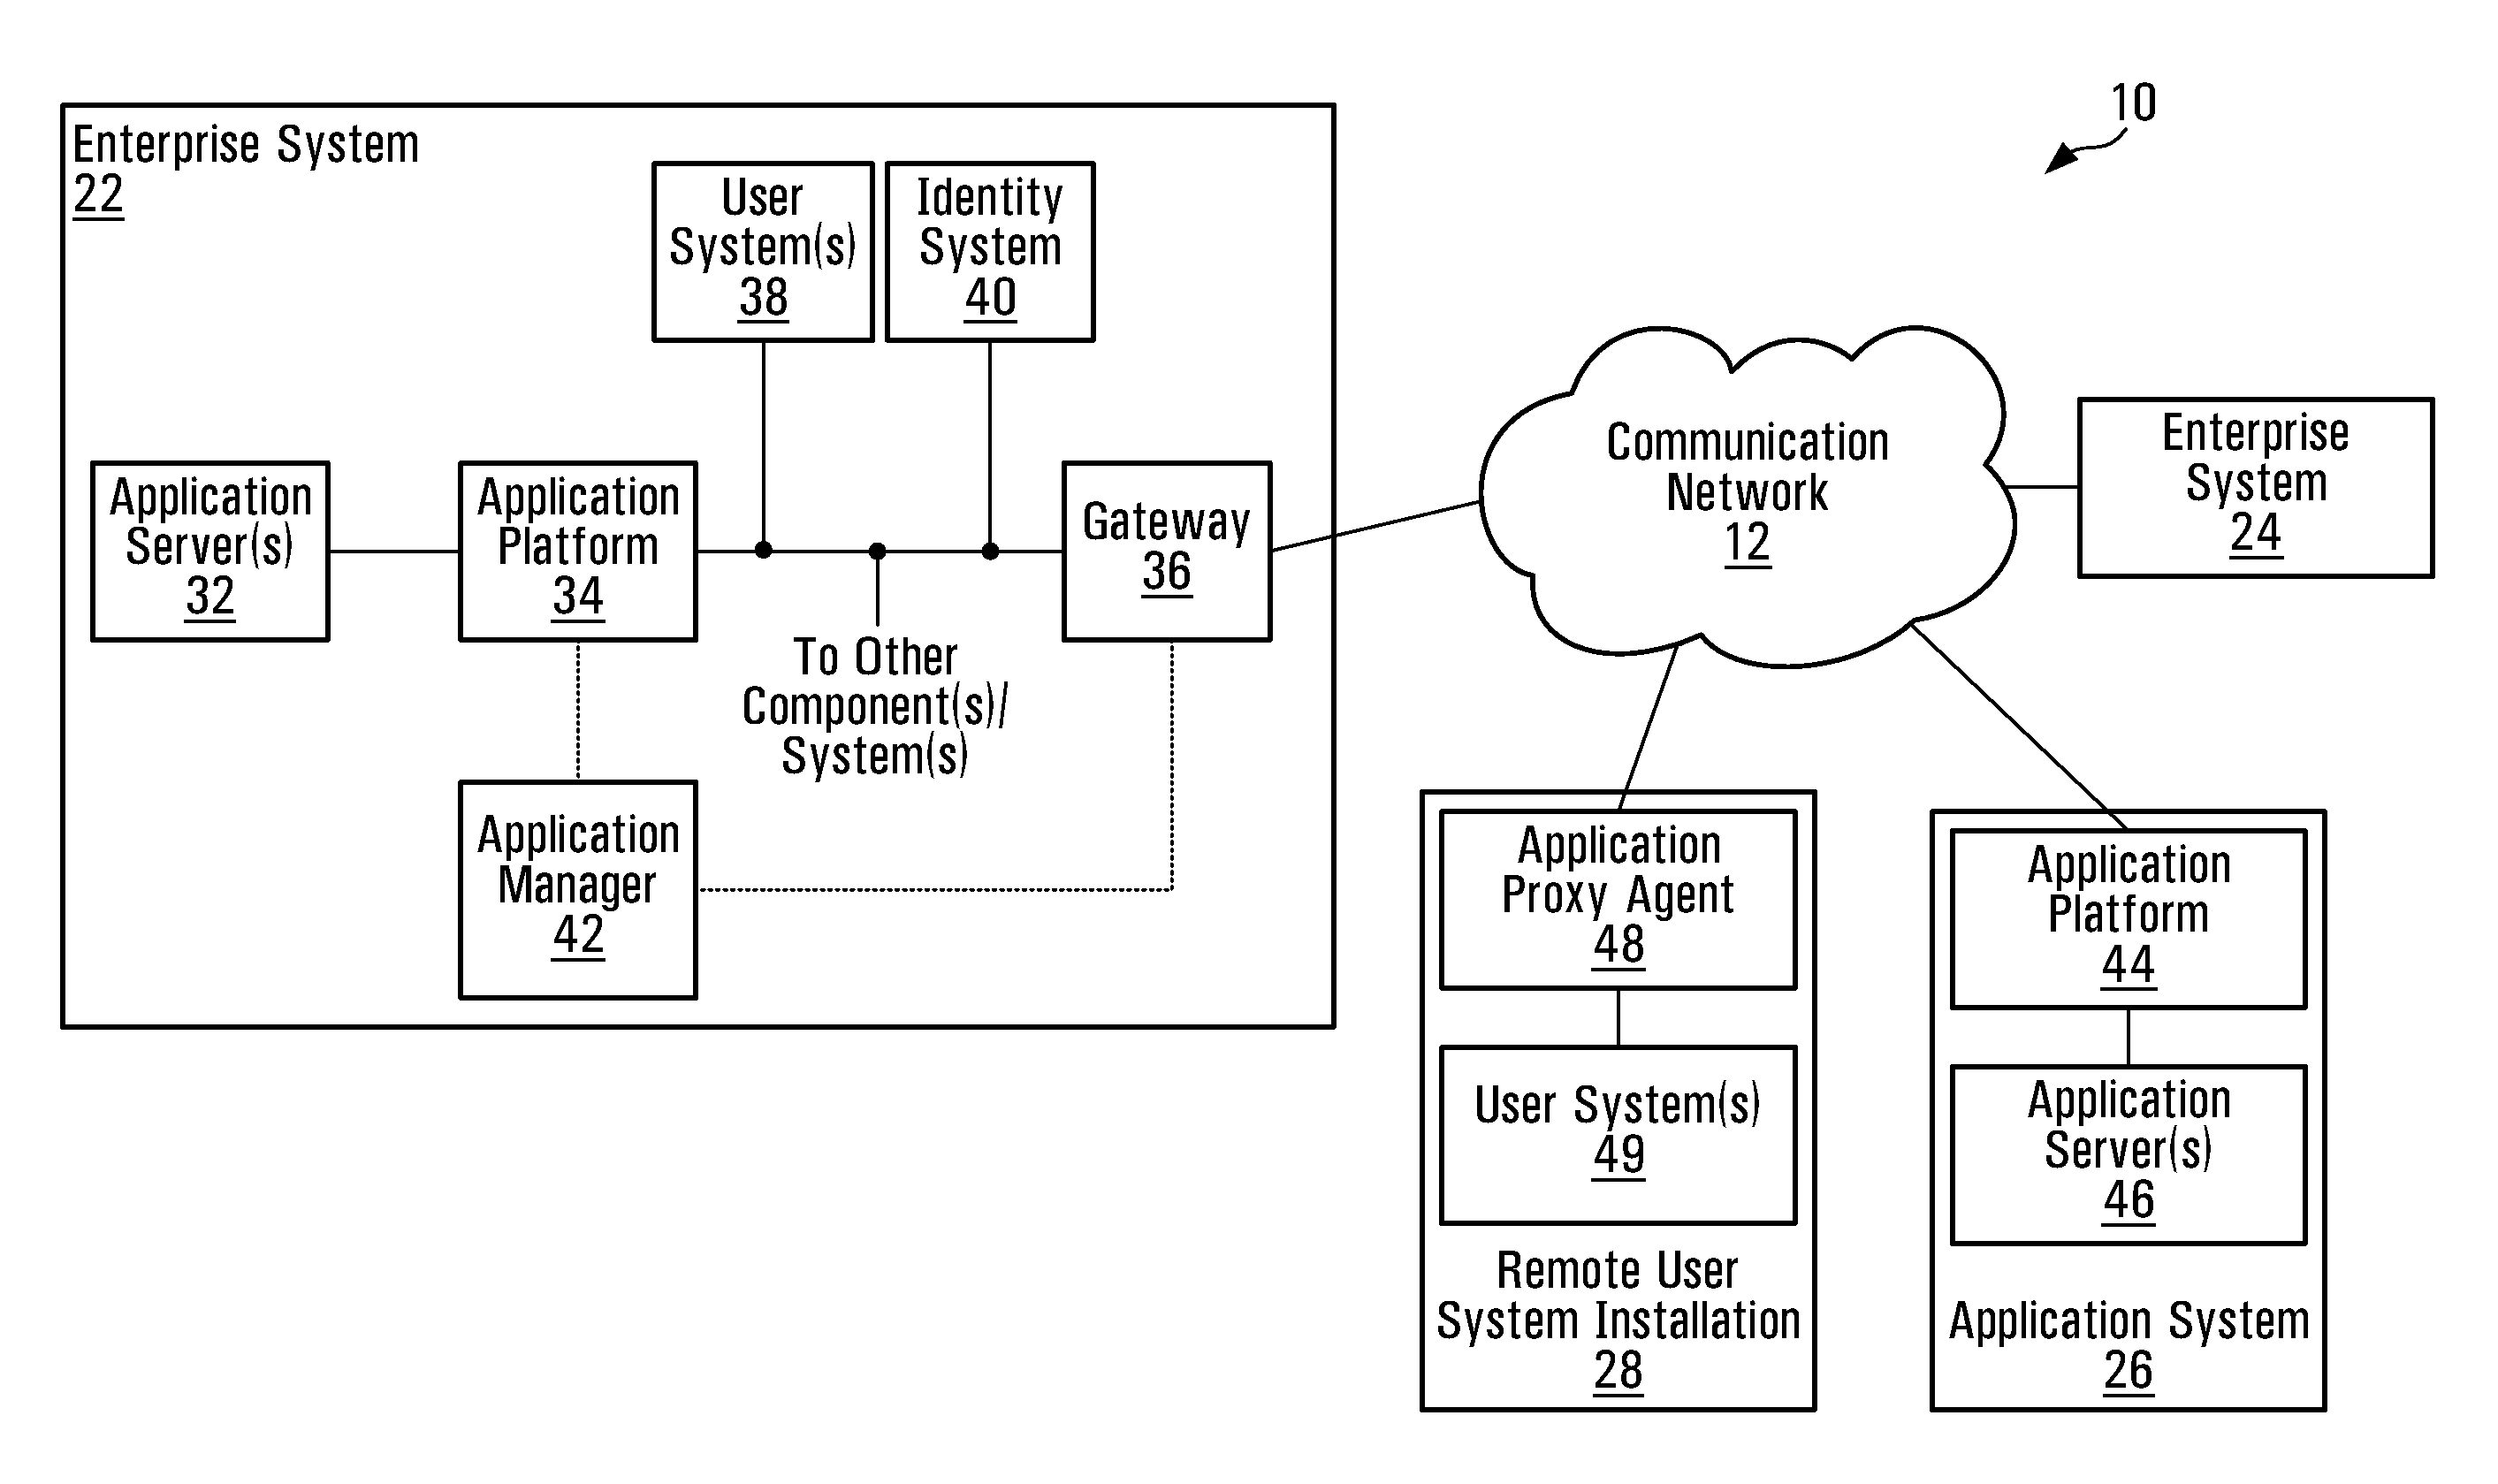 Secure domain information protection apparatus and methods